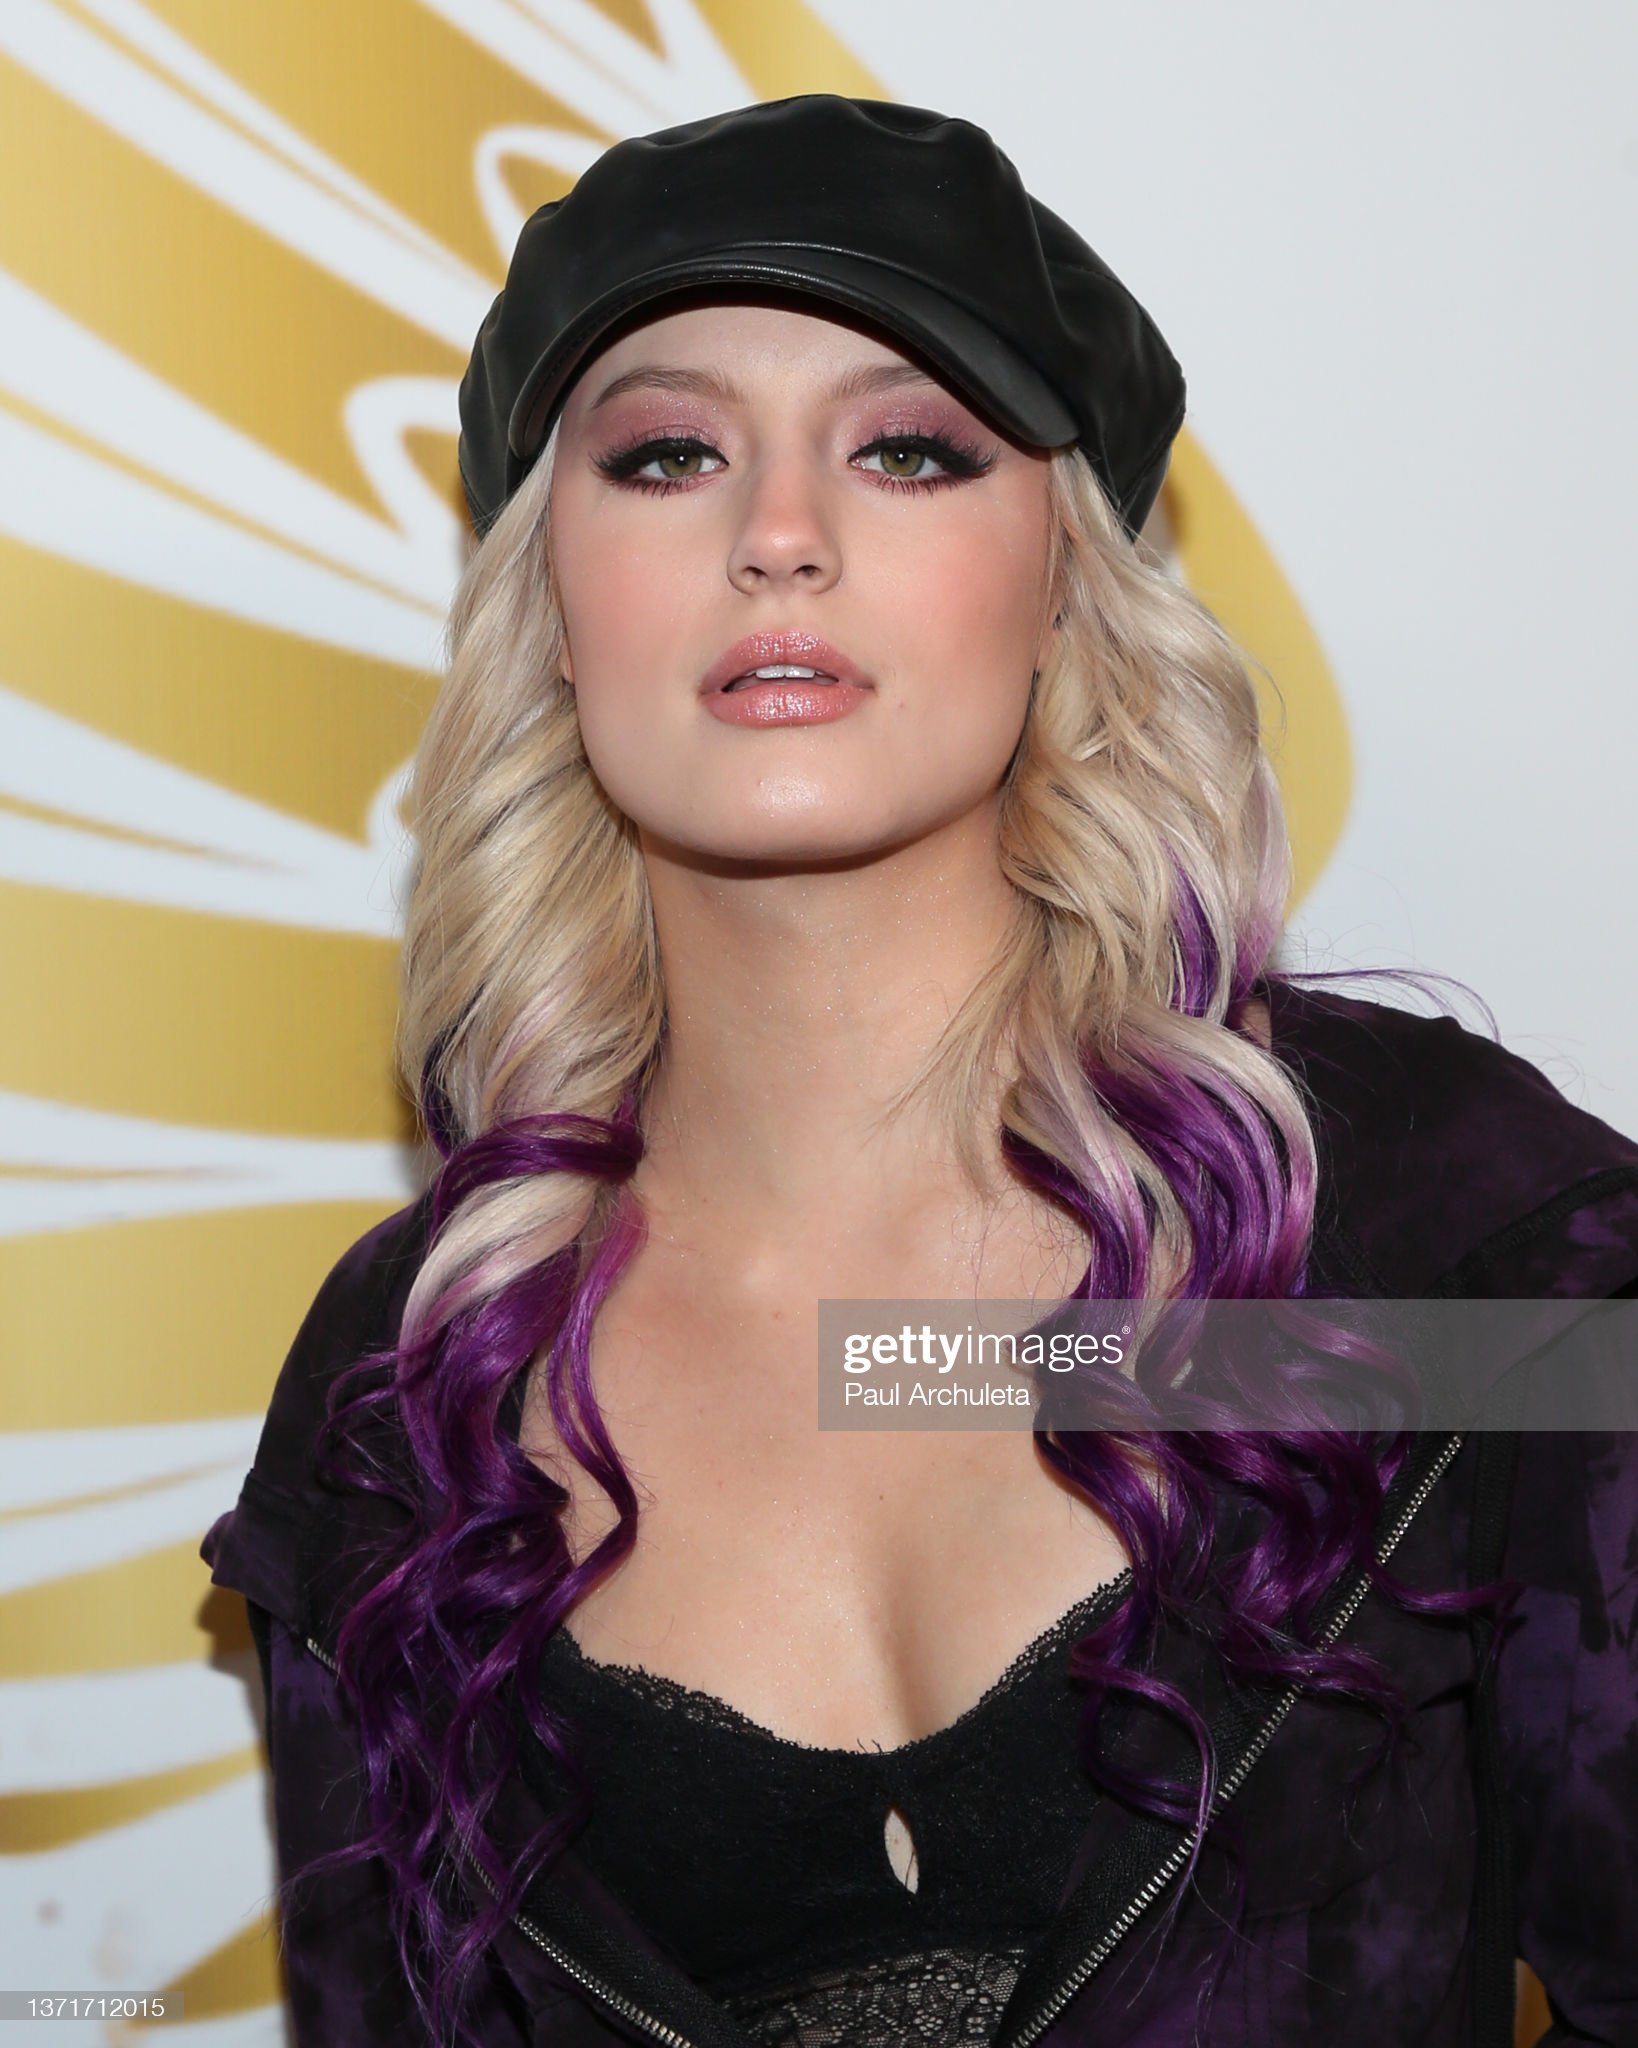 gettyimages-1371712015-2048x2048.jpg